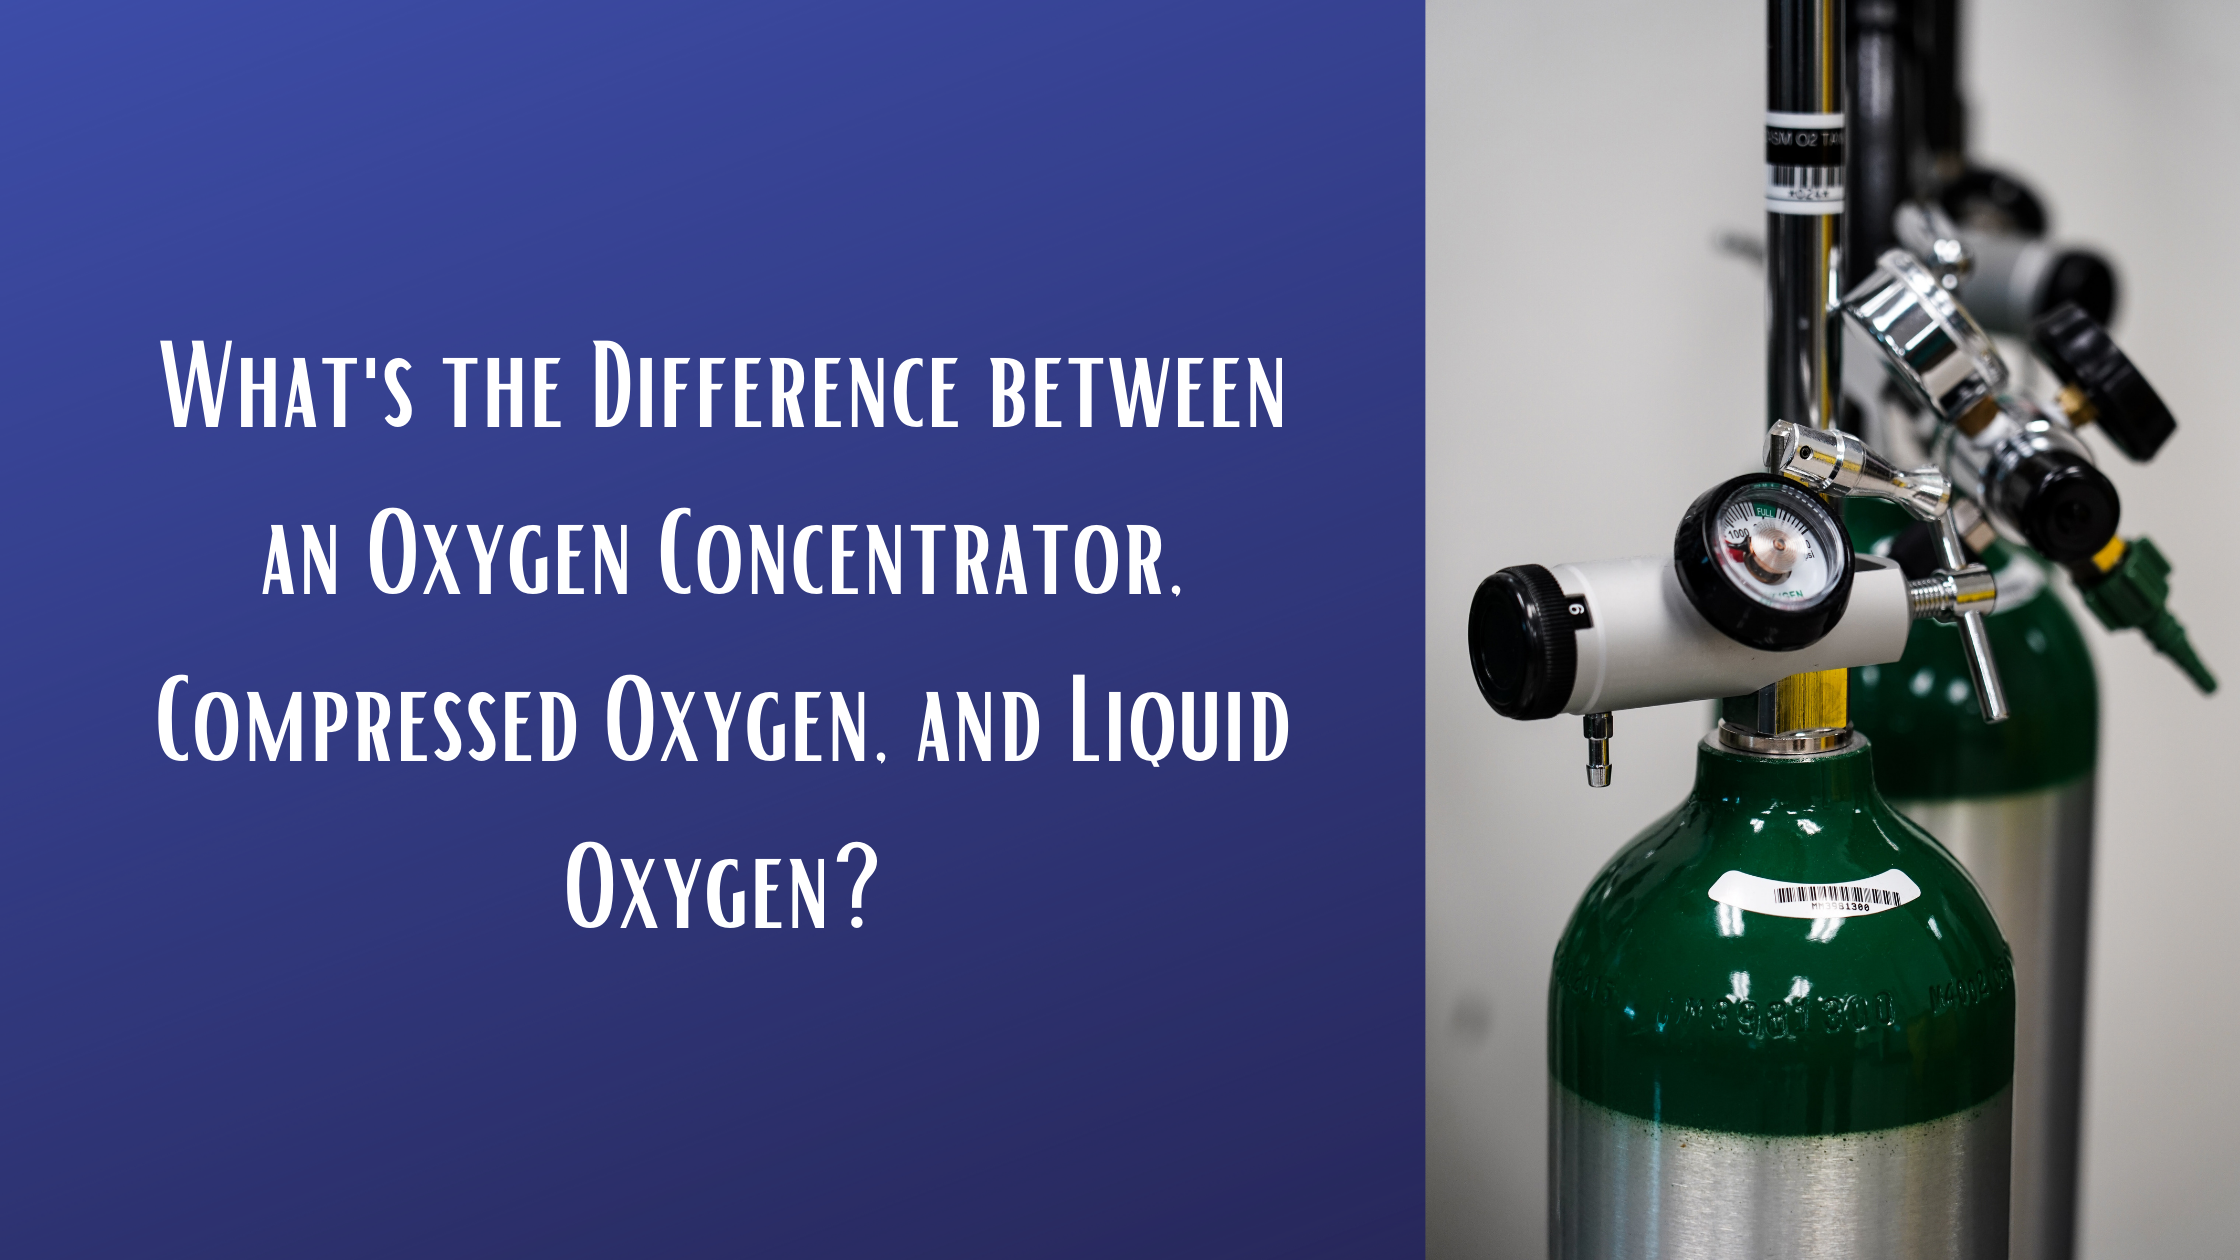 Whats the Difference between an Oxygen Concentrator, Compressed Oxygen, and Liquid Oxygen?